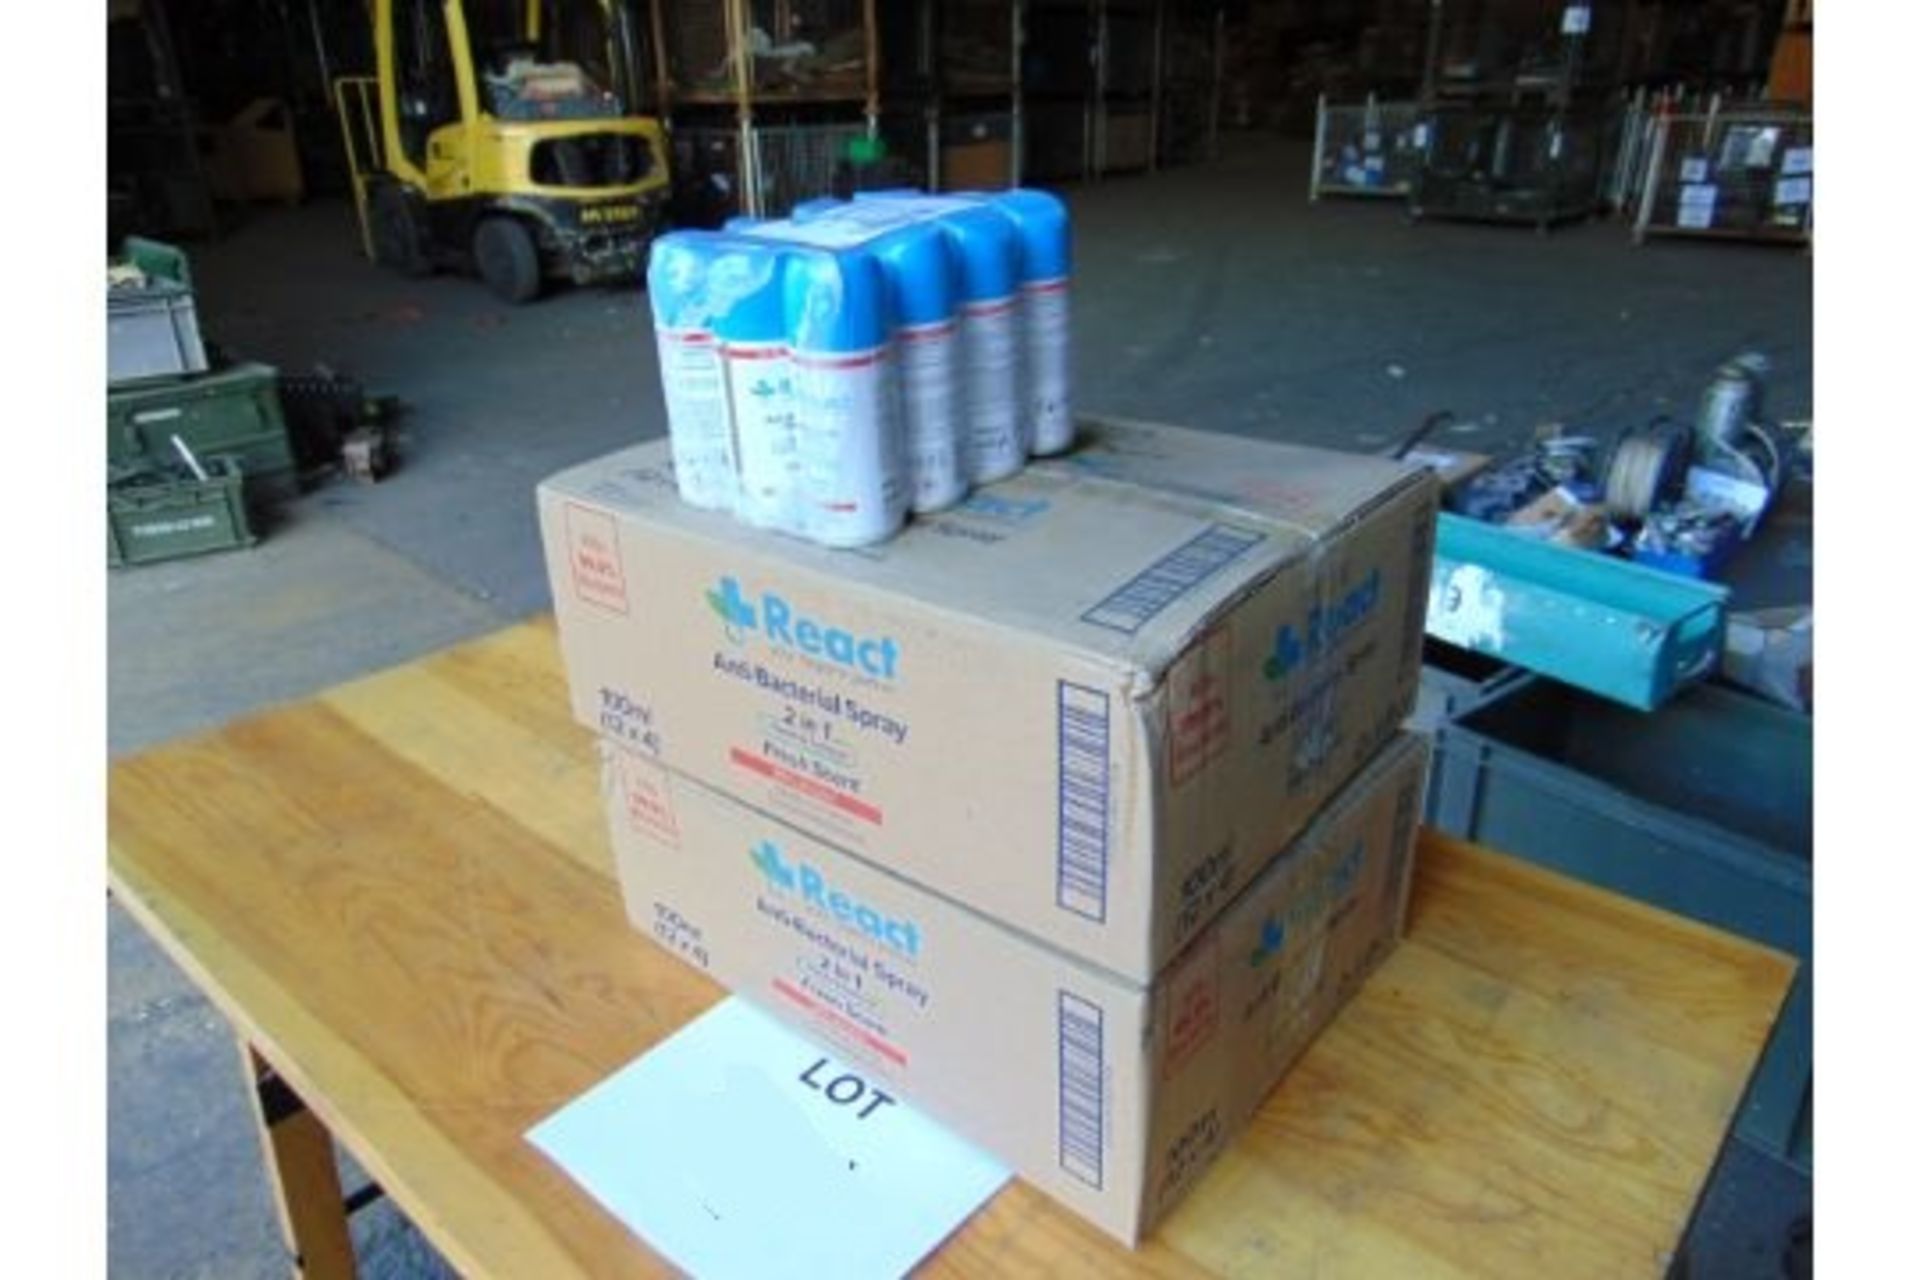 2x Box (96 Cans) REAC Anti Bacterial Spray - Image 3 of 3